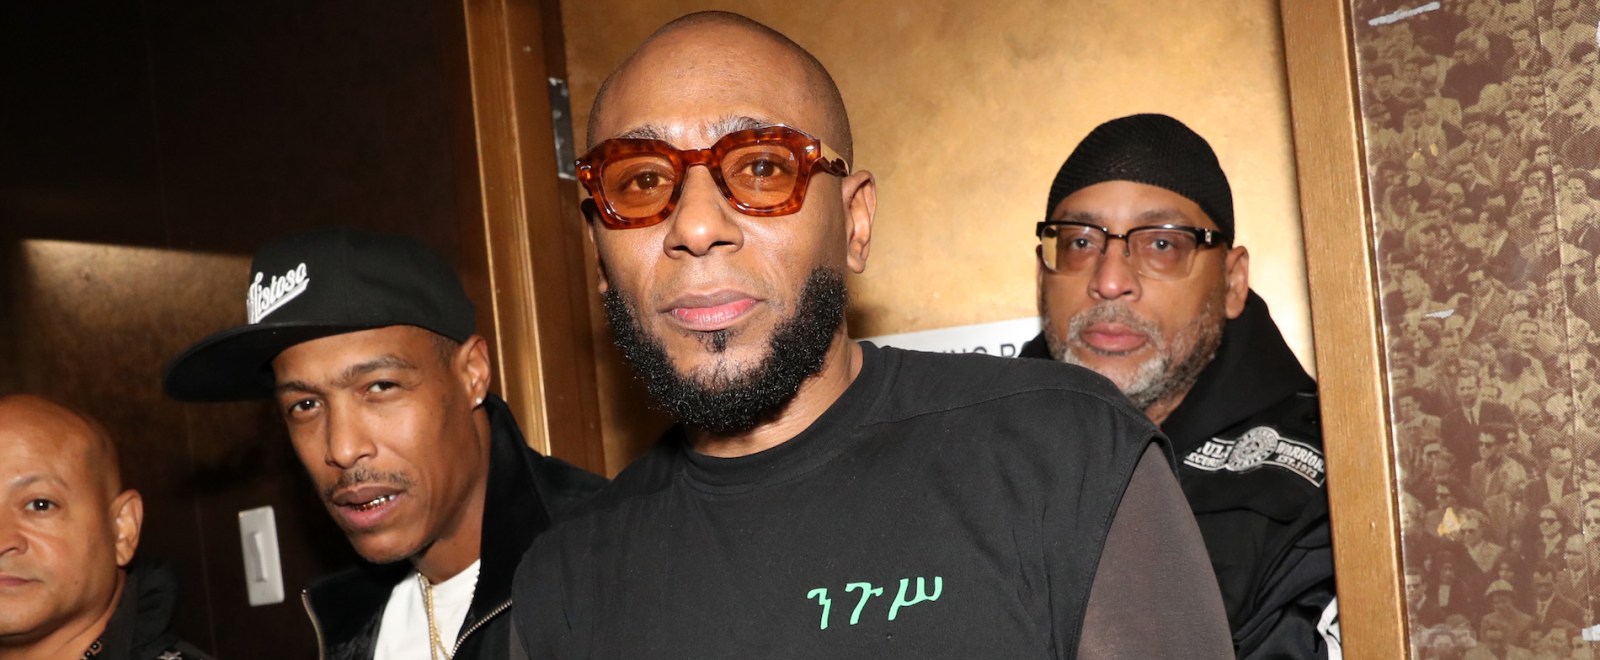 Yasiin Bey Admits Drake Is A ‘Talented MC,’ But That Doesn’t Mean He Takes Back What He Said About Drake’s ‘Pop’ Music #Drake